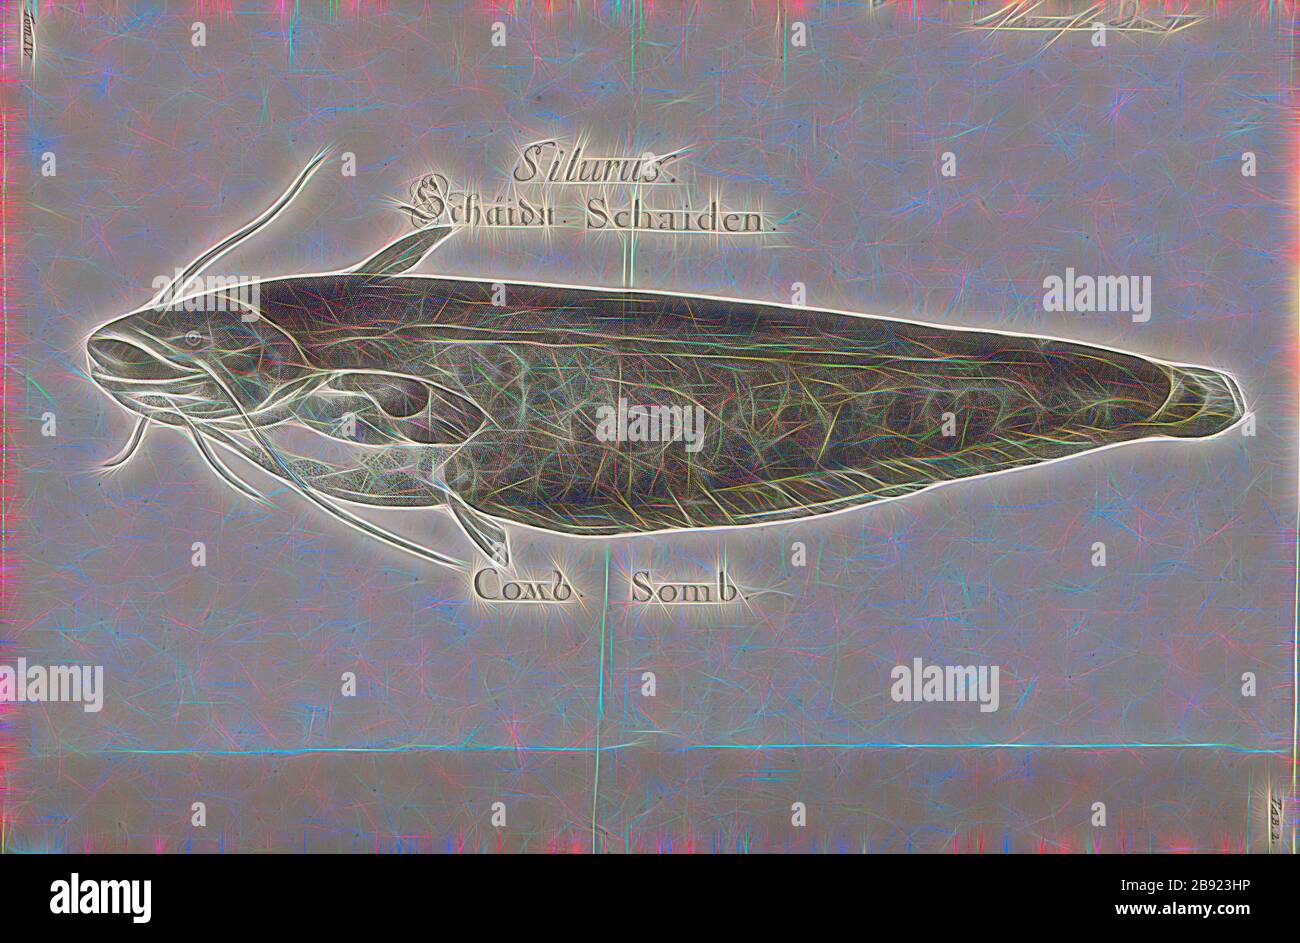 Silurus glanis, Print, The wels catfish, also called sheatfish, is a large species of catfish native to wide areas of central, southern, and eastern Europe, in the basins of the Baltic, Black, and Caspian Seas. It has been introduced to Western Europe as a prized sport fish and is now found from the United Kingdom east to Kazakhstan and China and south to Greece and Turkey. It is a scaleless freshwater fish recognizable by its broad, flat head and wide mouth. Wels catfish can live for at least fifty years., 1700-1880, Reimagined by Gibon, design of warm cheerful glowing of brightness and light Stock Photo